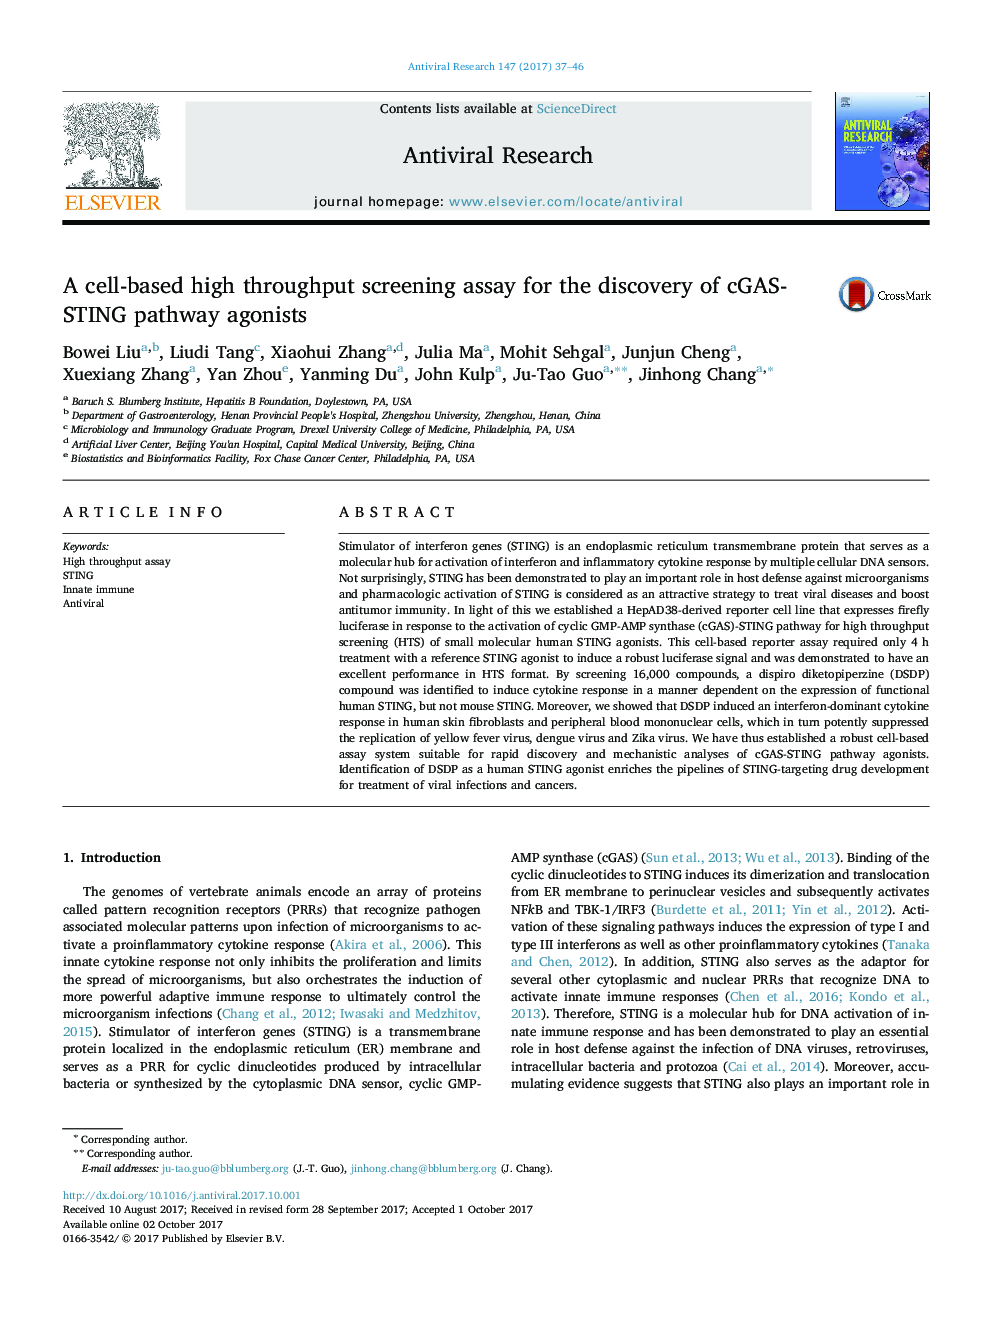 A cell-based high throughput screening assay for the discovery of cGAS-STING pathway agonists